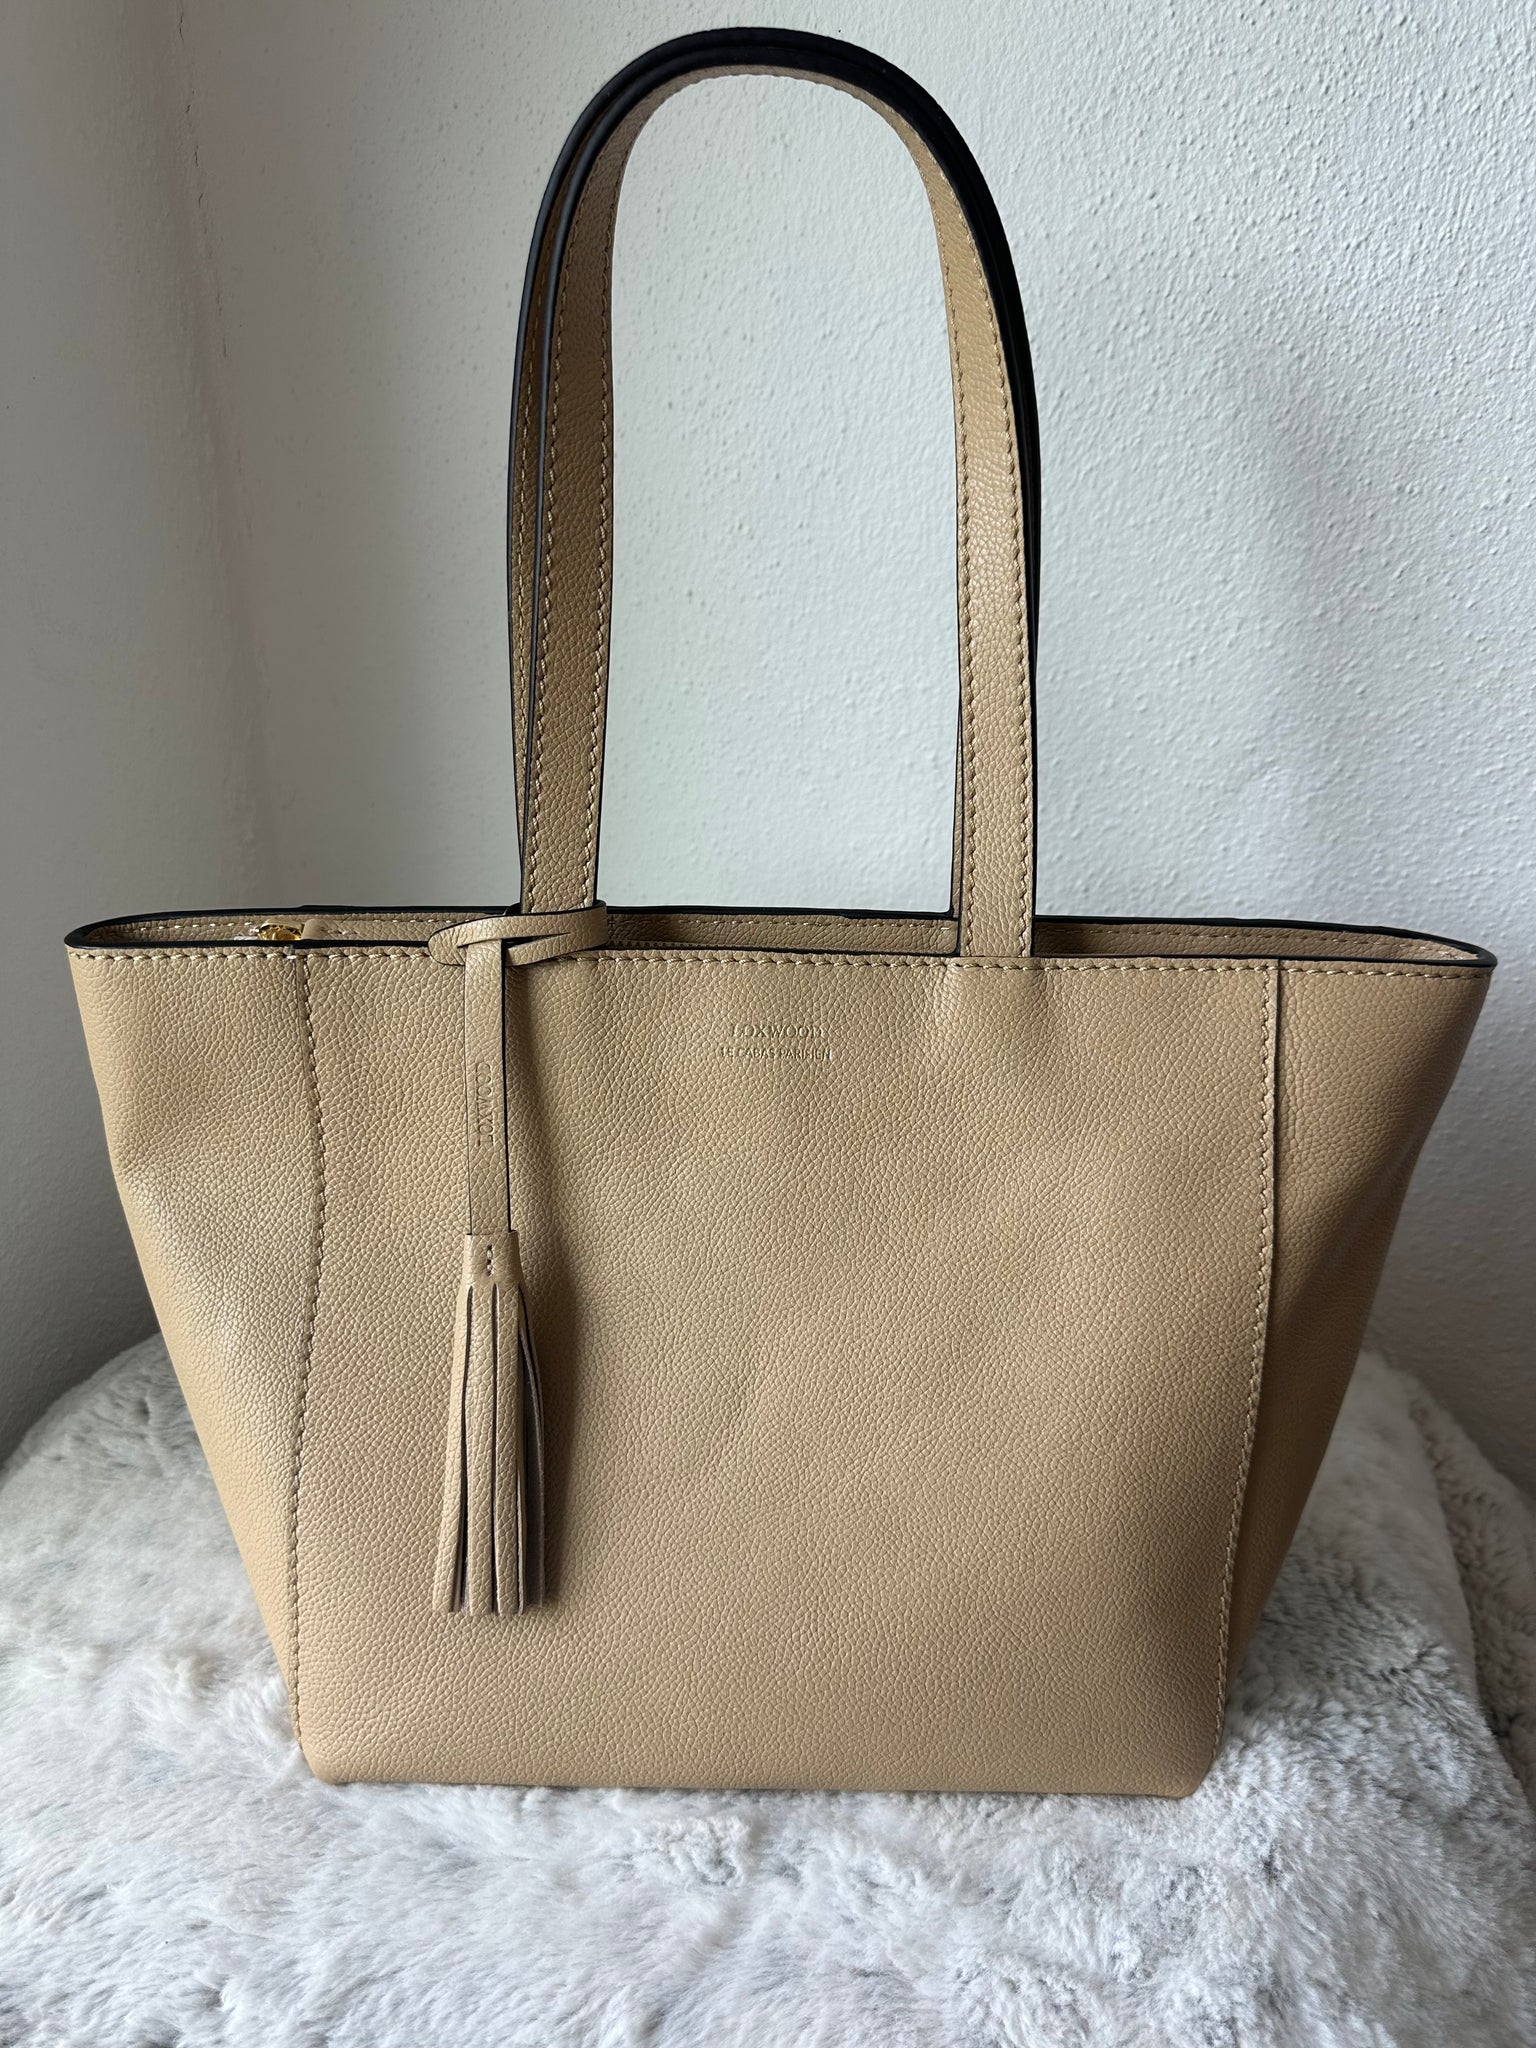 Shopper by Loxwood "le Cabas Parisien" in "Sand" zippered